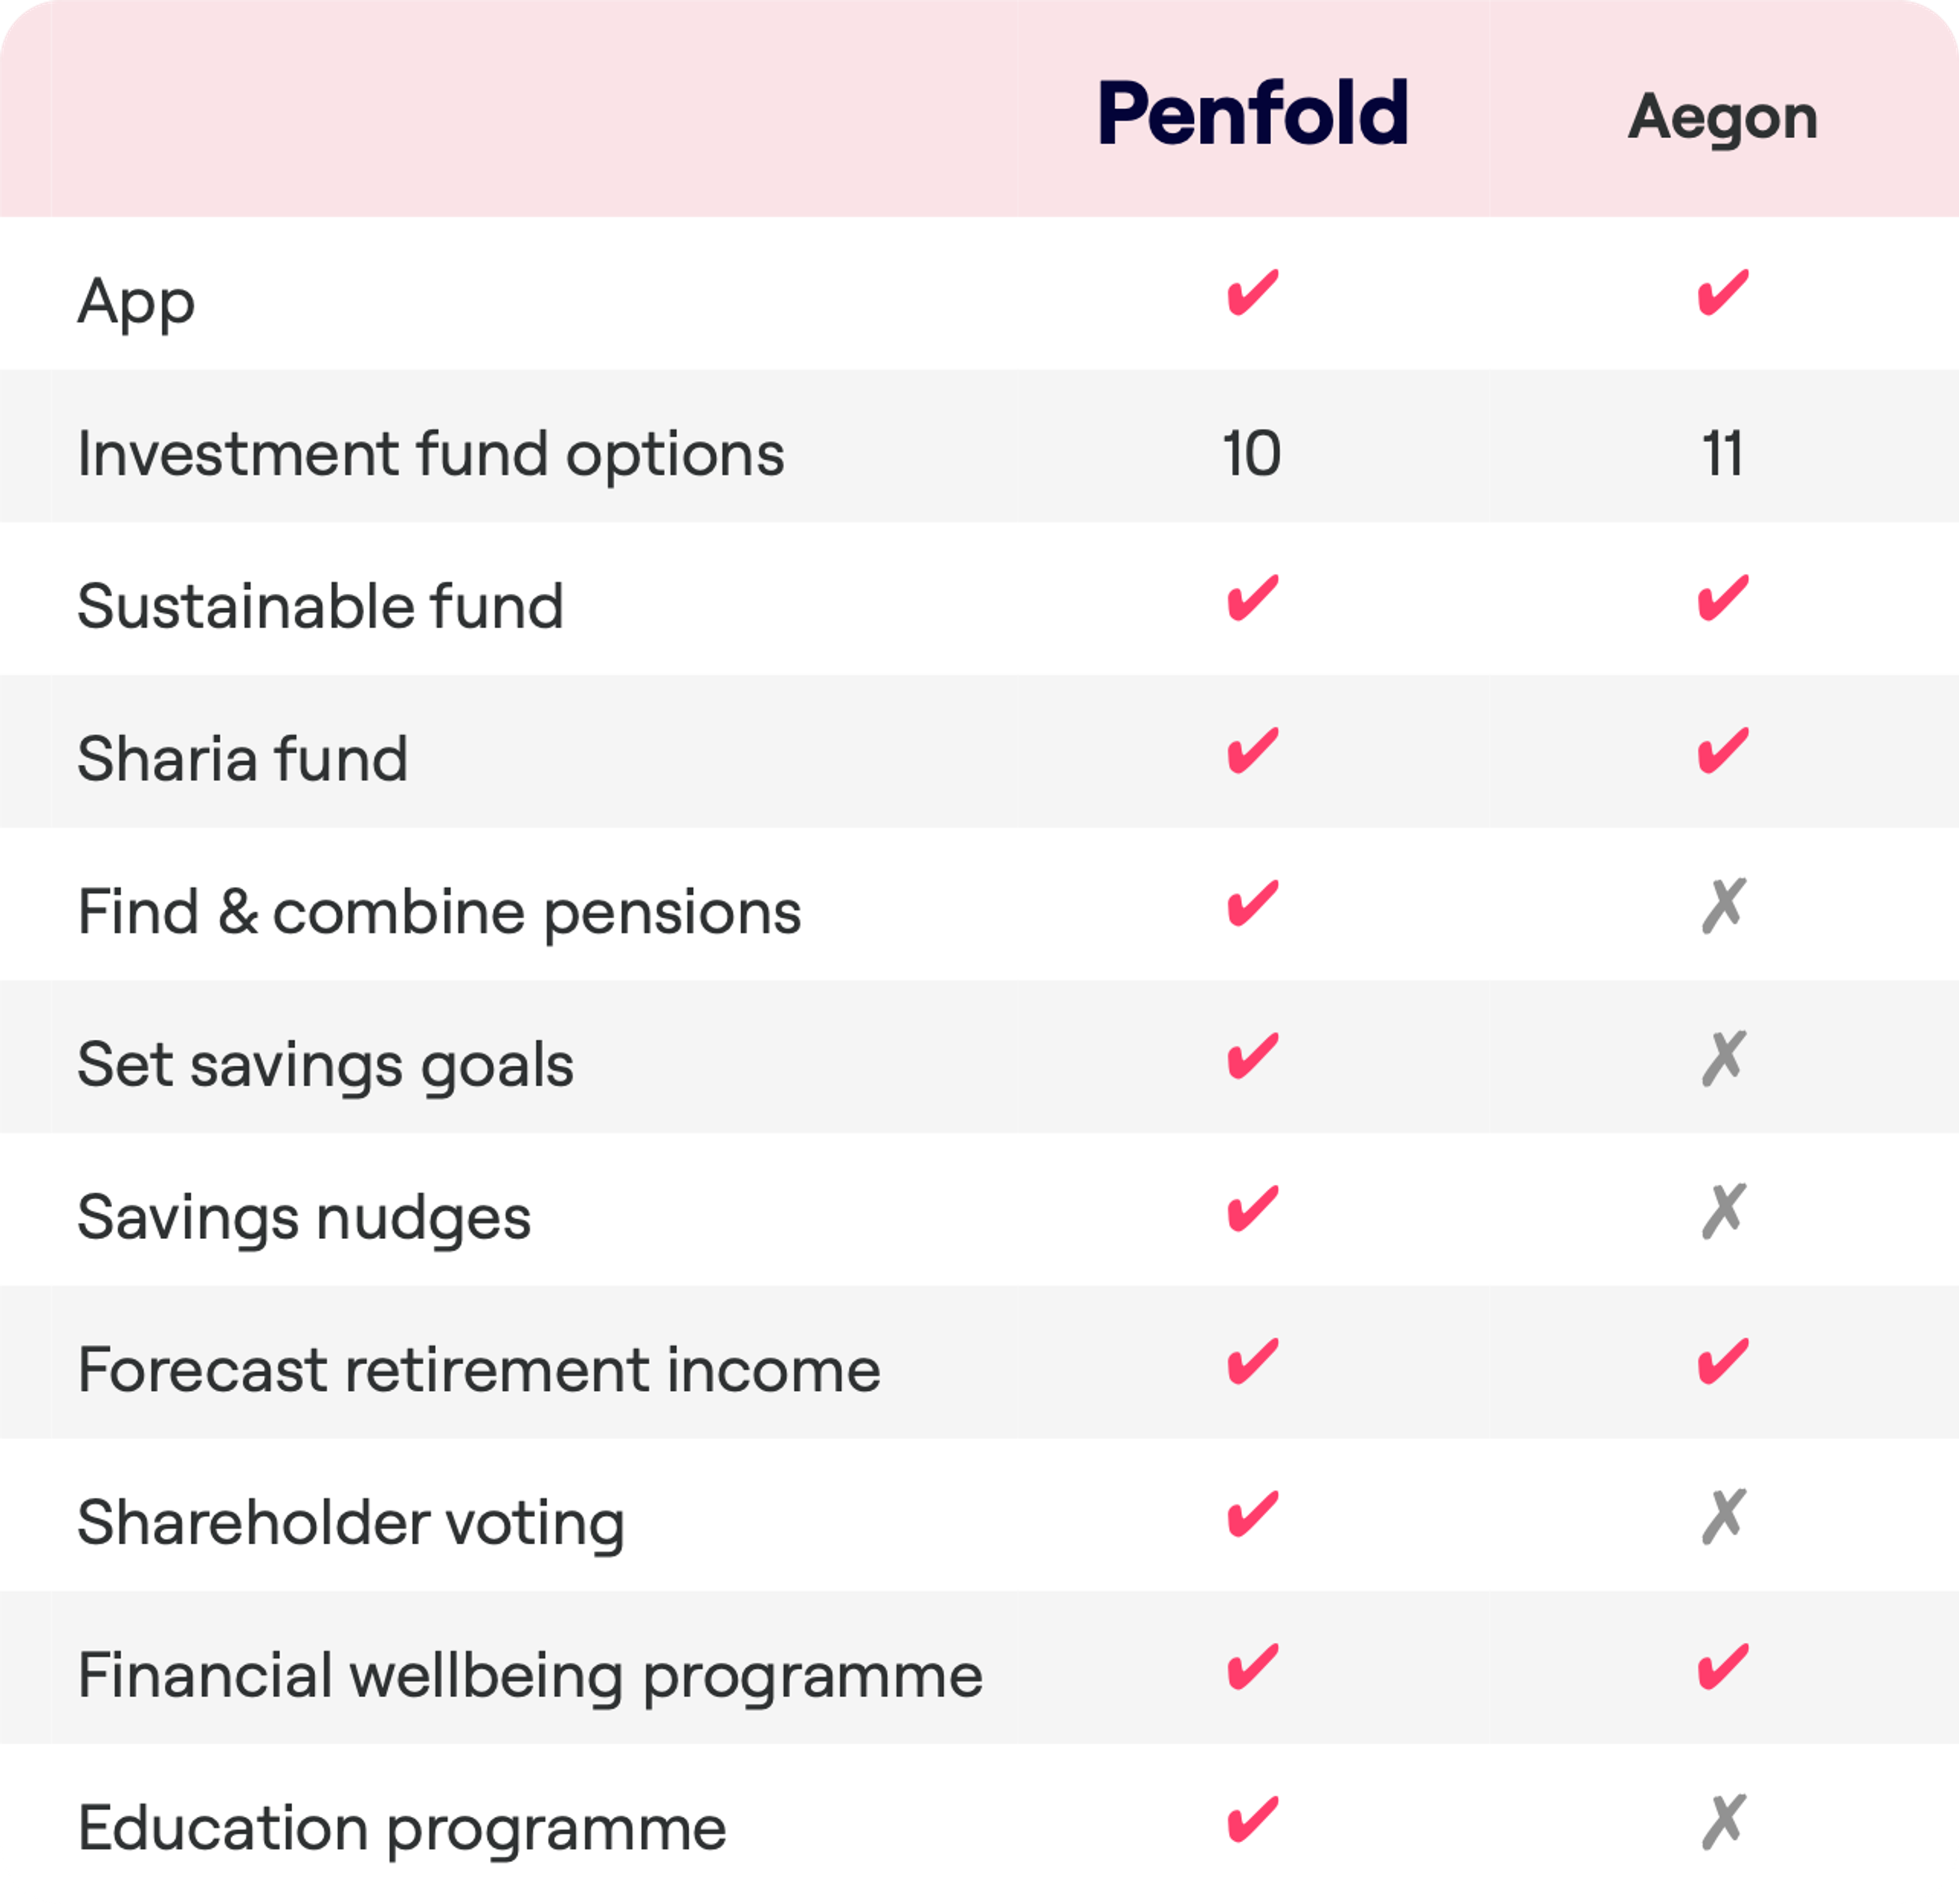 A feature comparison chart for Penfold and Aegon pension services. Both offer an app, investment fund options, a sustainable fund, and a Sharia fund. Penfold provides 10 investment fund options, while Aegon offers 11. Penfold also allows clients to find and combine pensions, set savings goals, receive savings nudges, forecast retirement income, and has shareholder voting, a financial wellbeing programme, and an education programme. Aegon does not offer these features, except for a financial wellbeing programme.